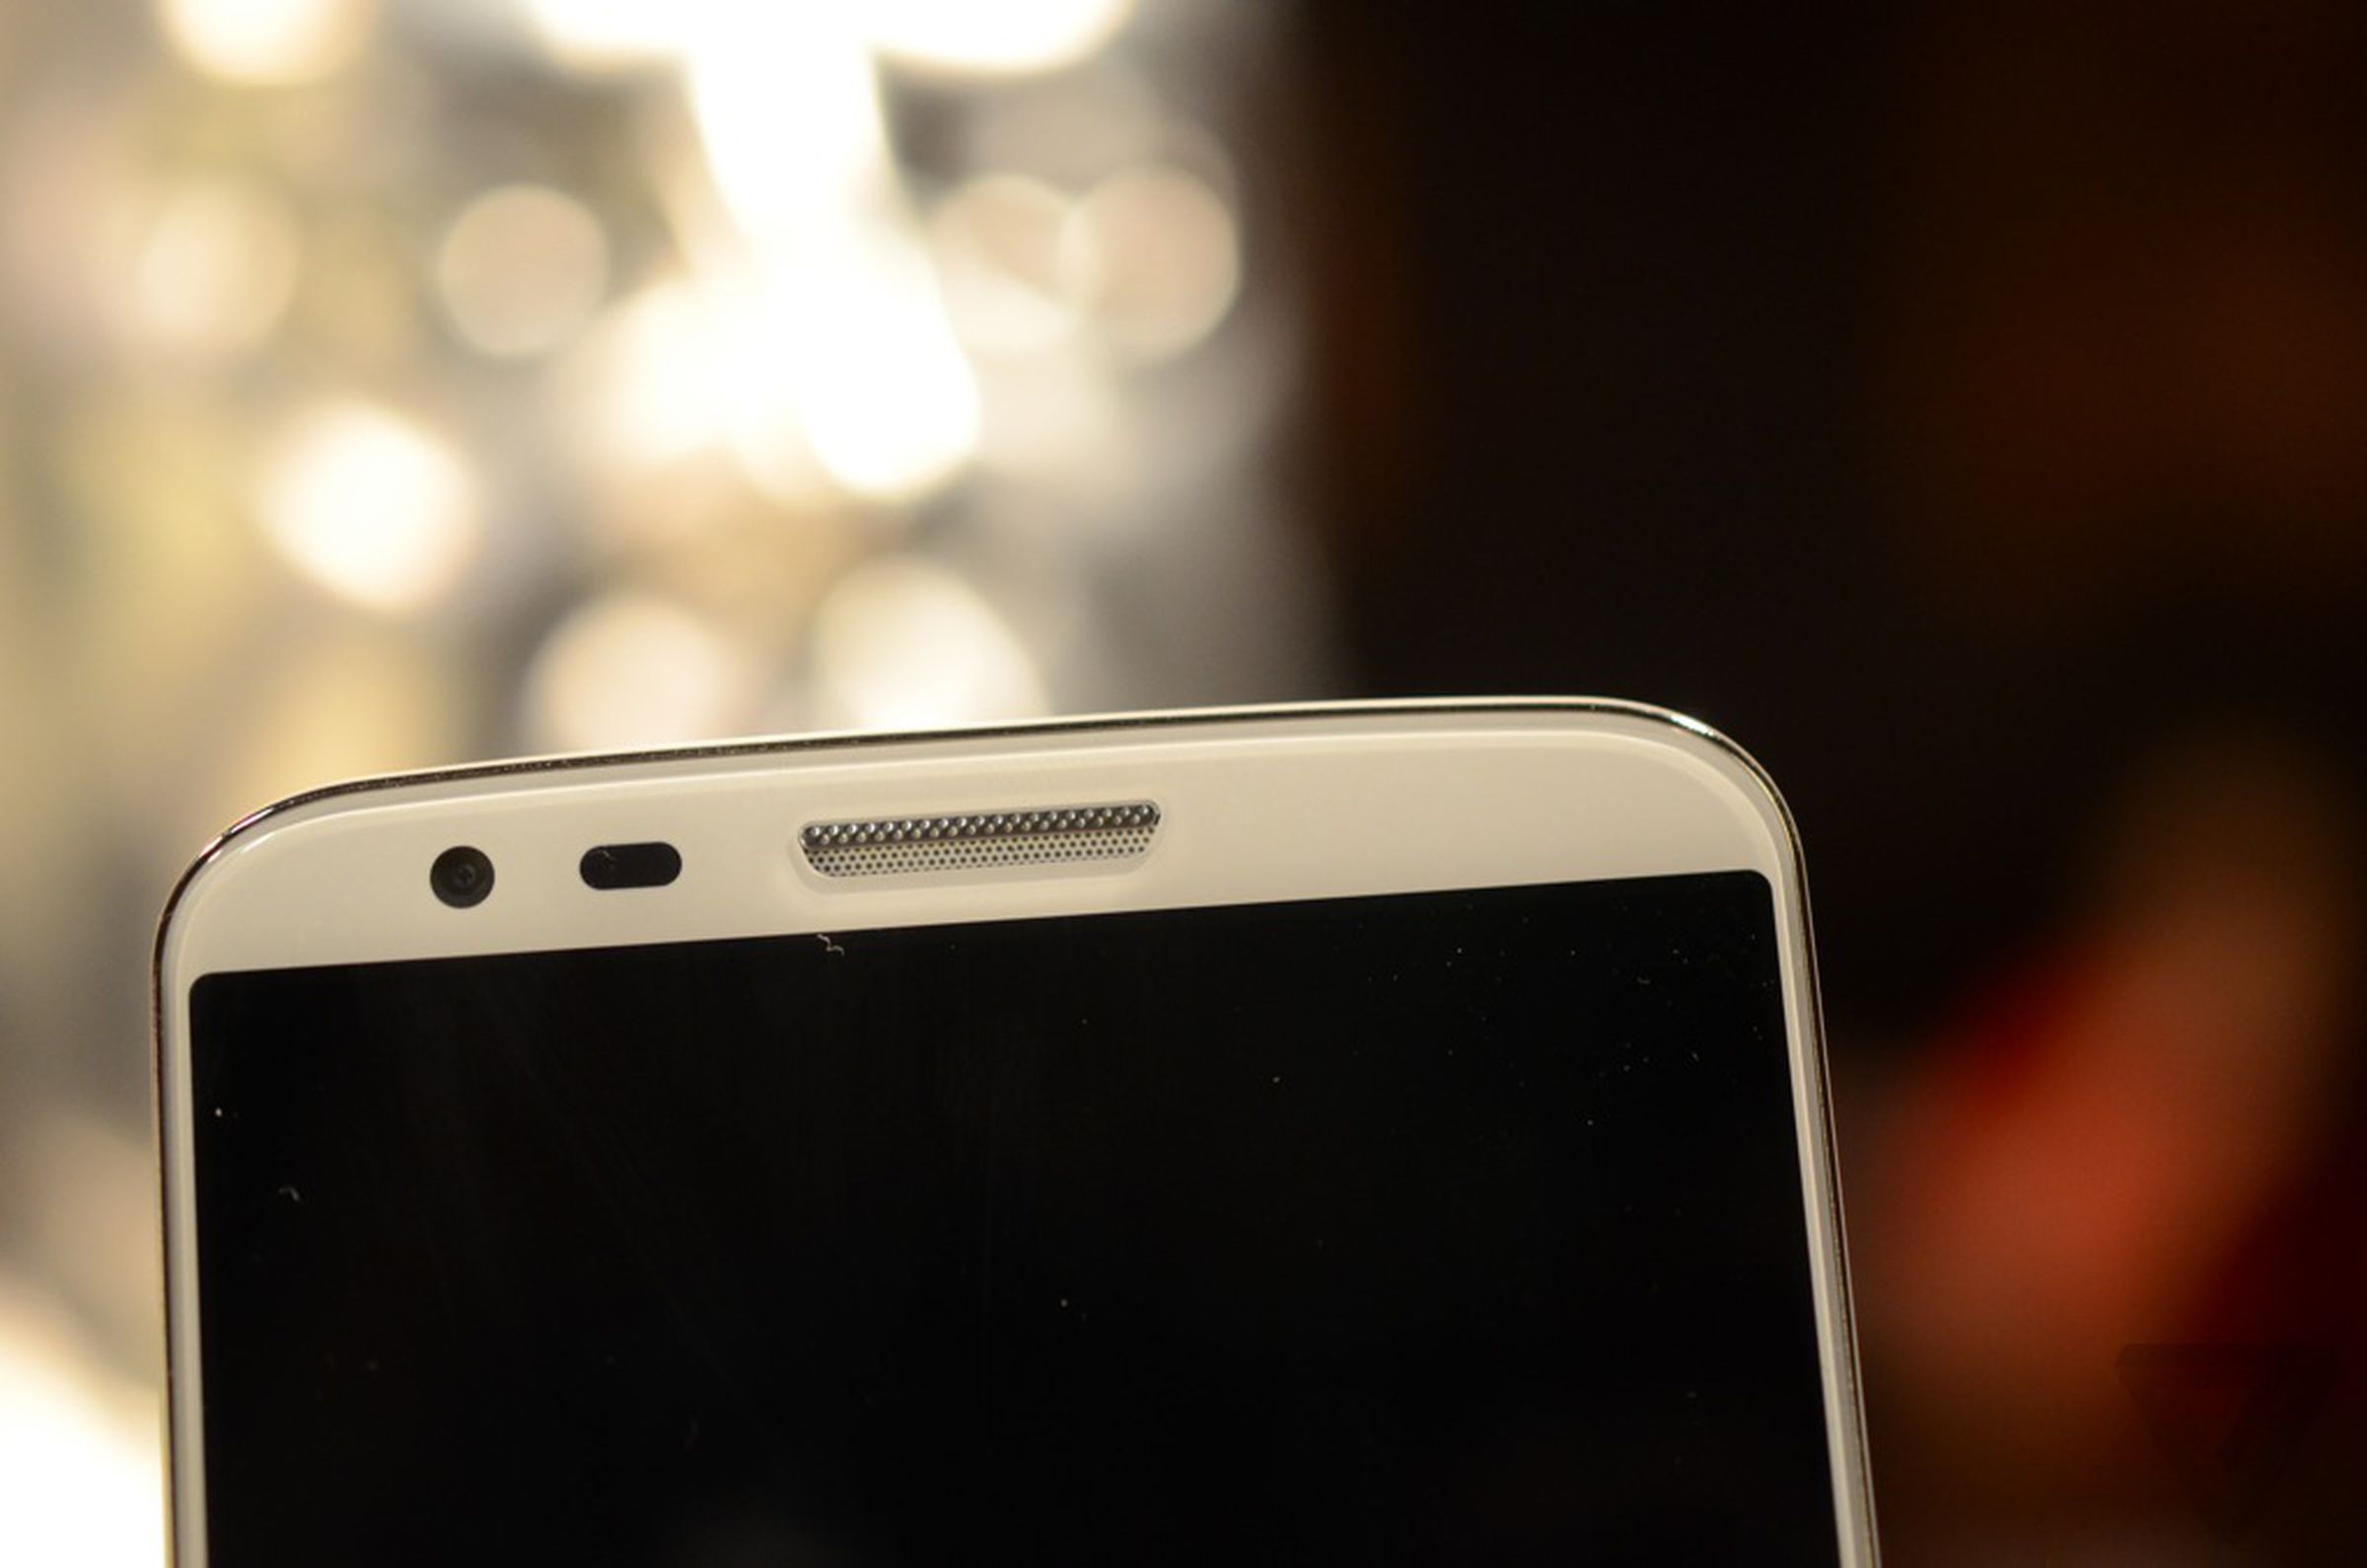 LG G2 hands-on pictures